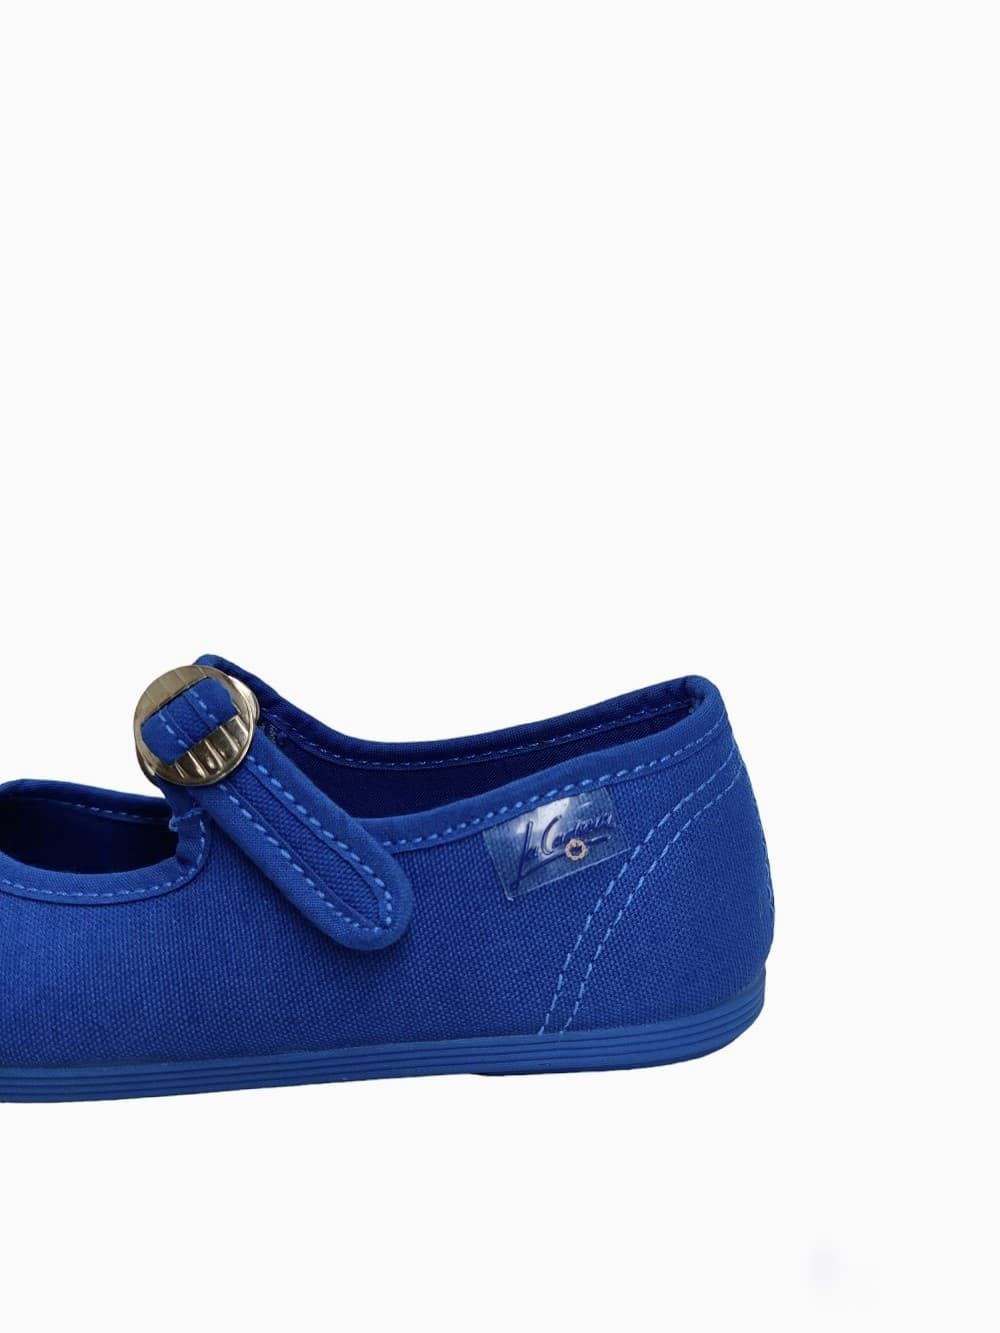 The Merceditas Chain for girls Blue Canvas - Image 3